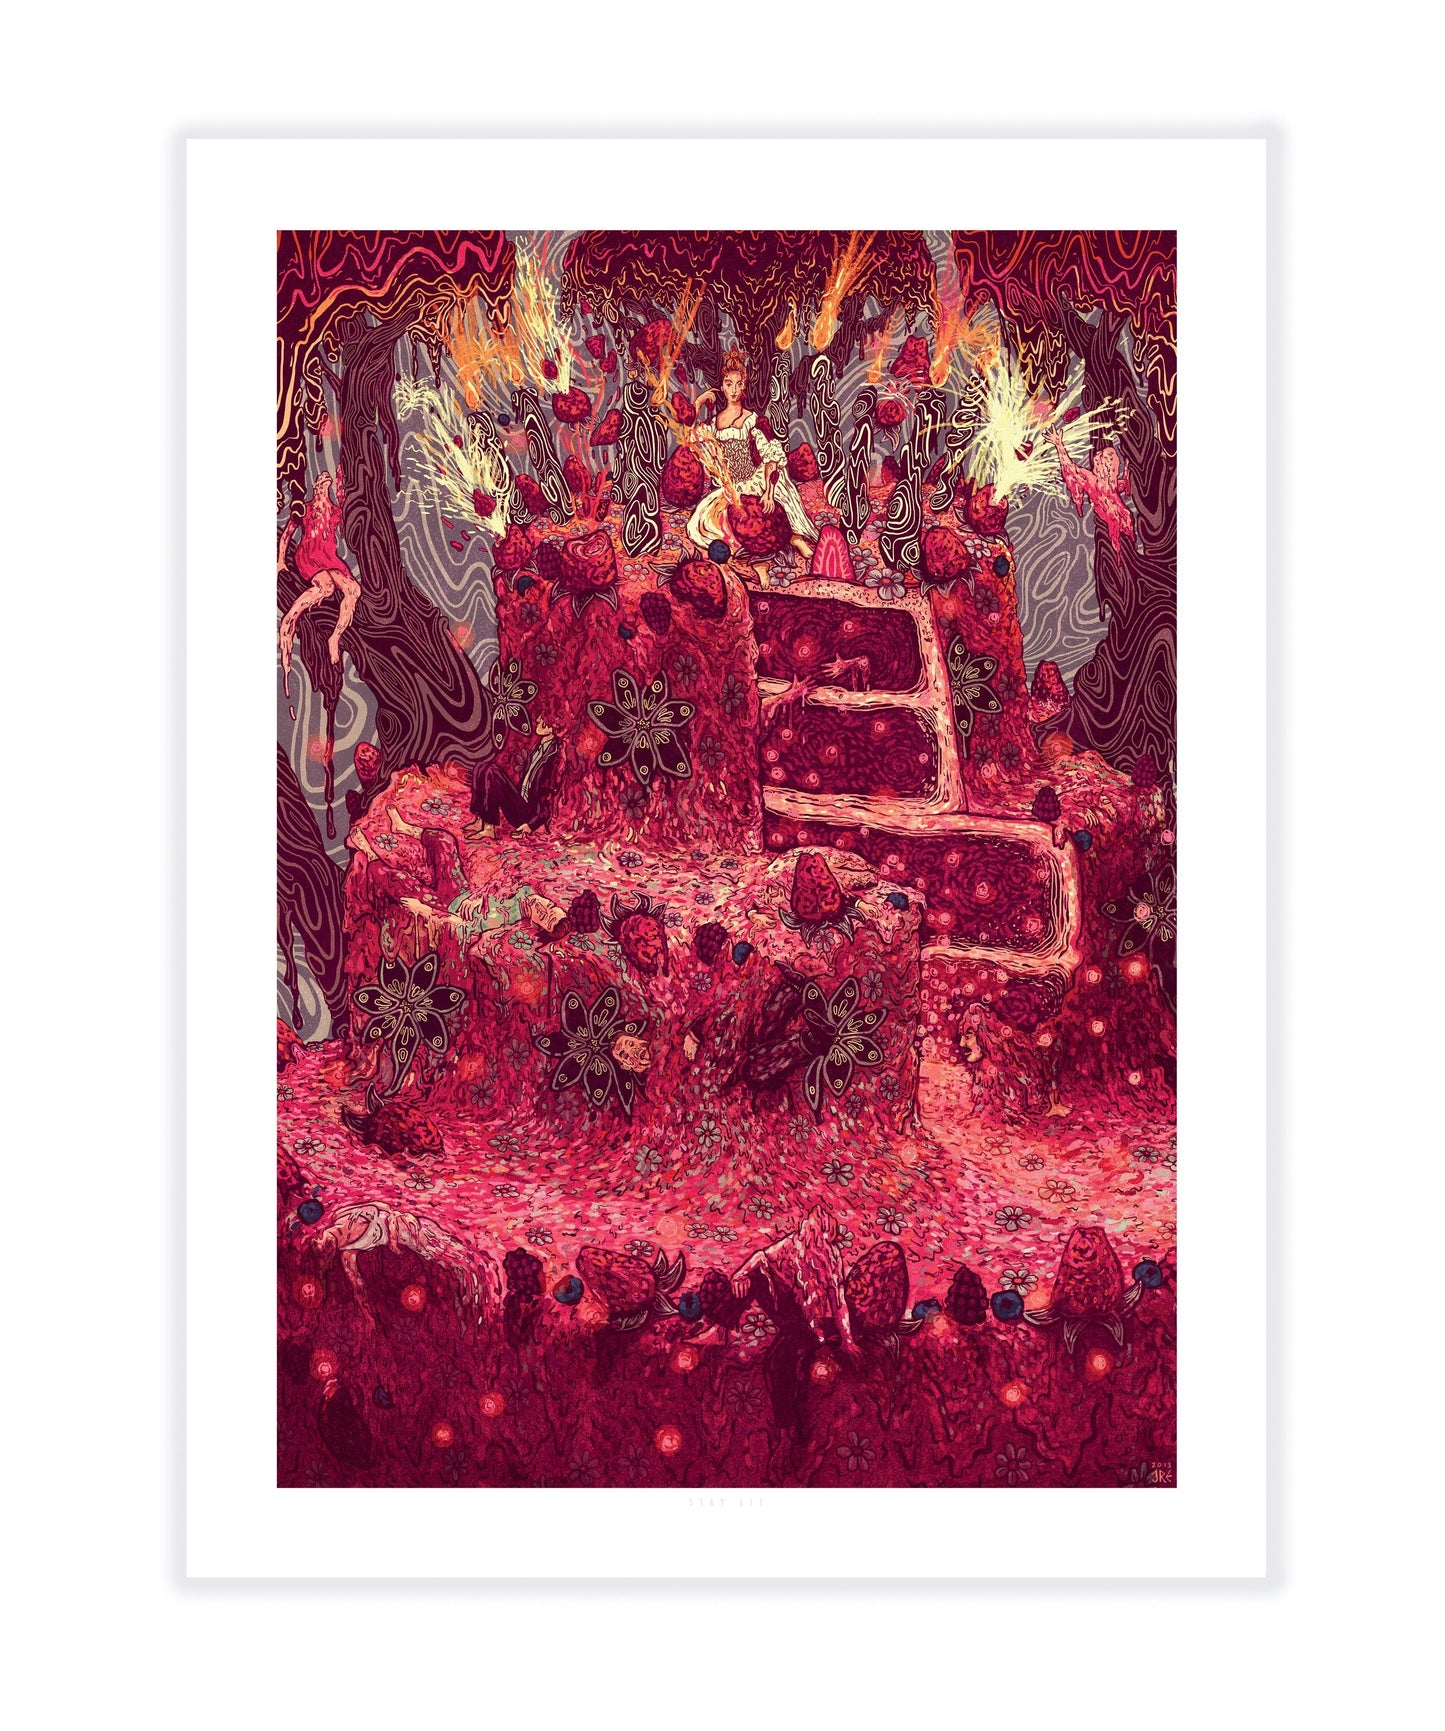 Stay Lit (Limited Edition of 40) Print James R. Eads